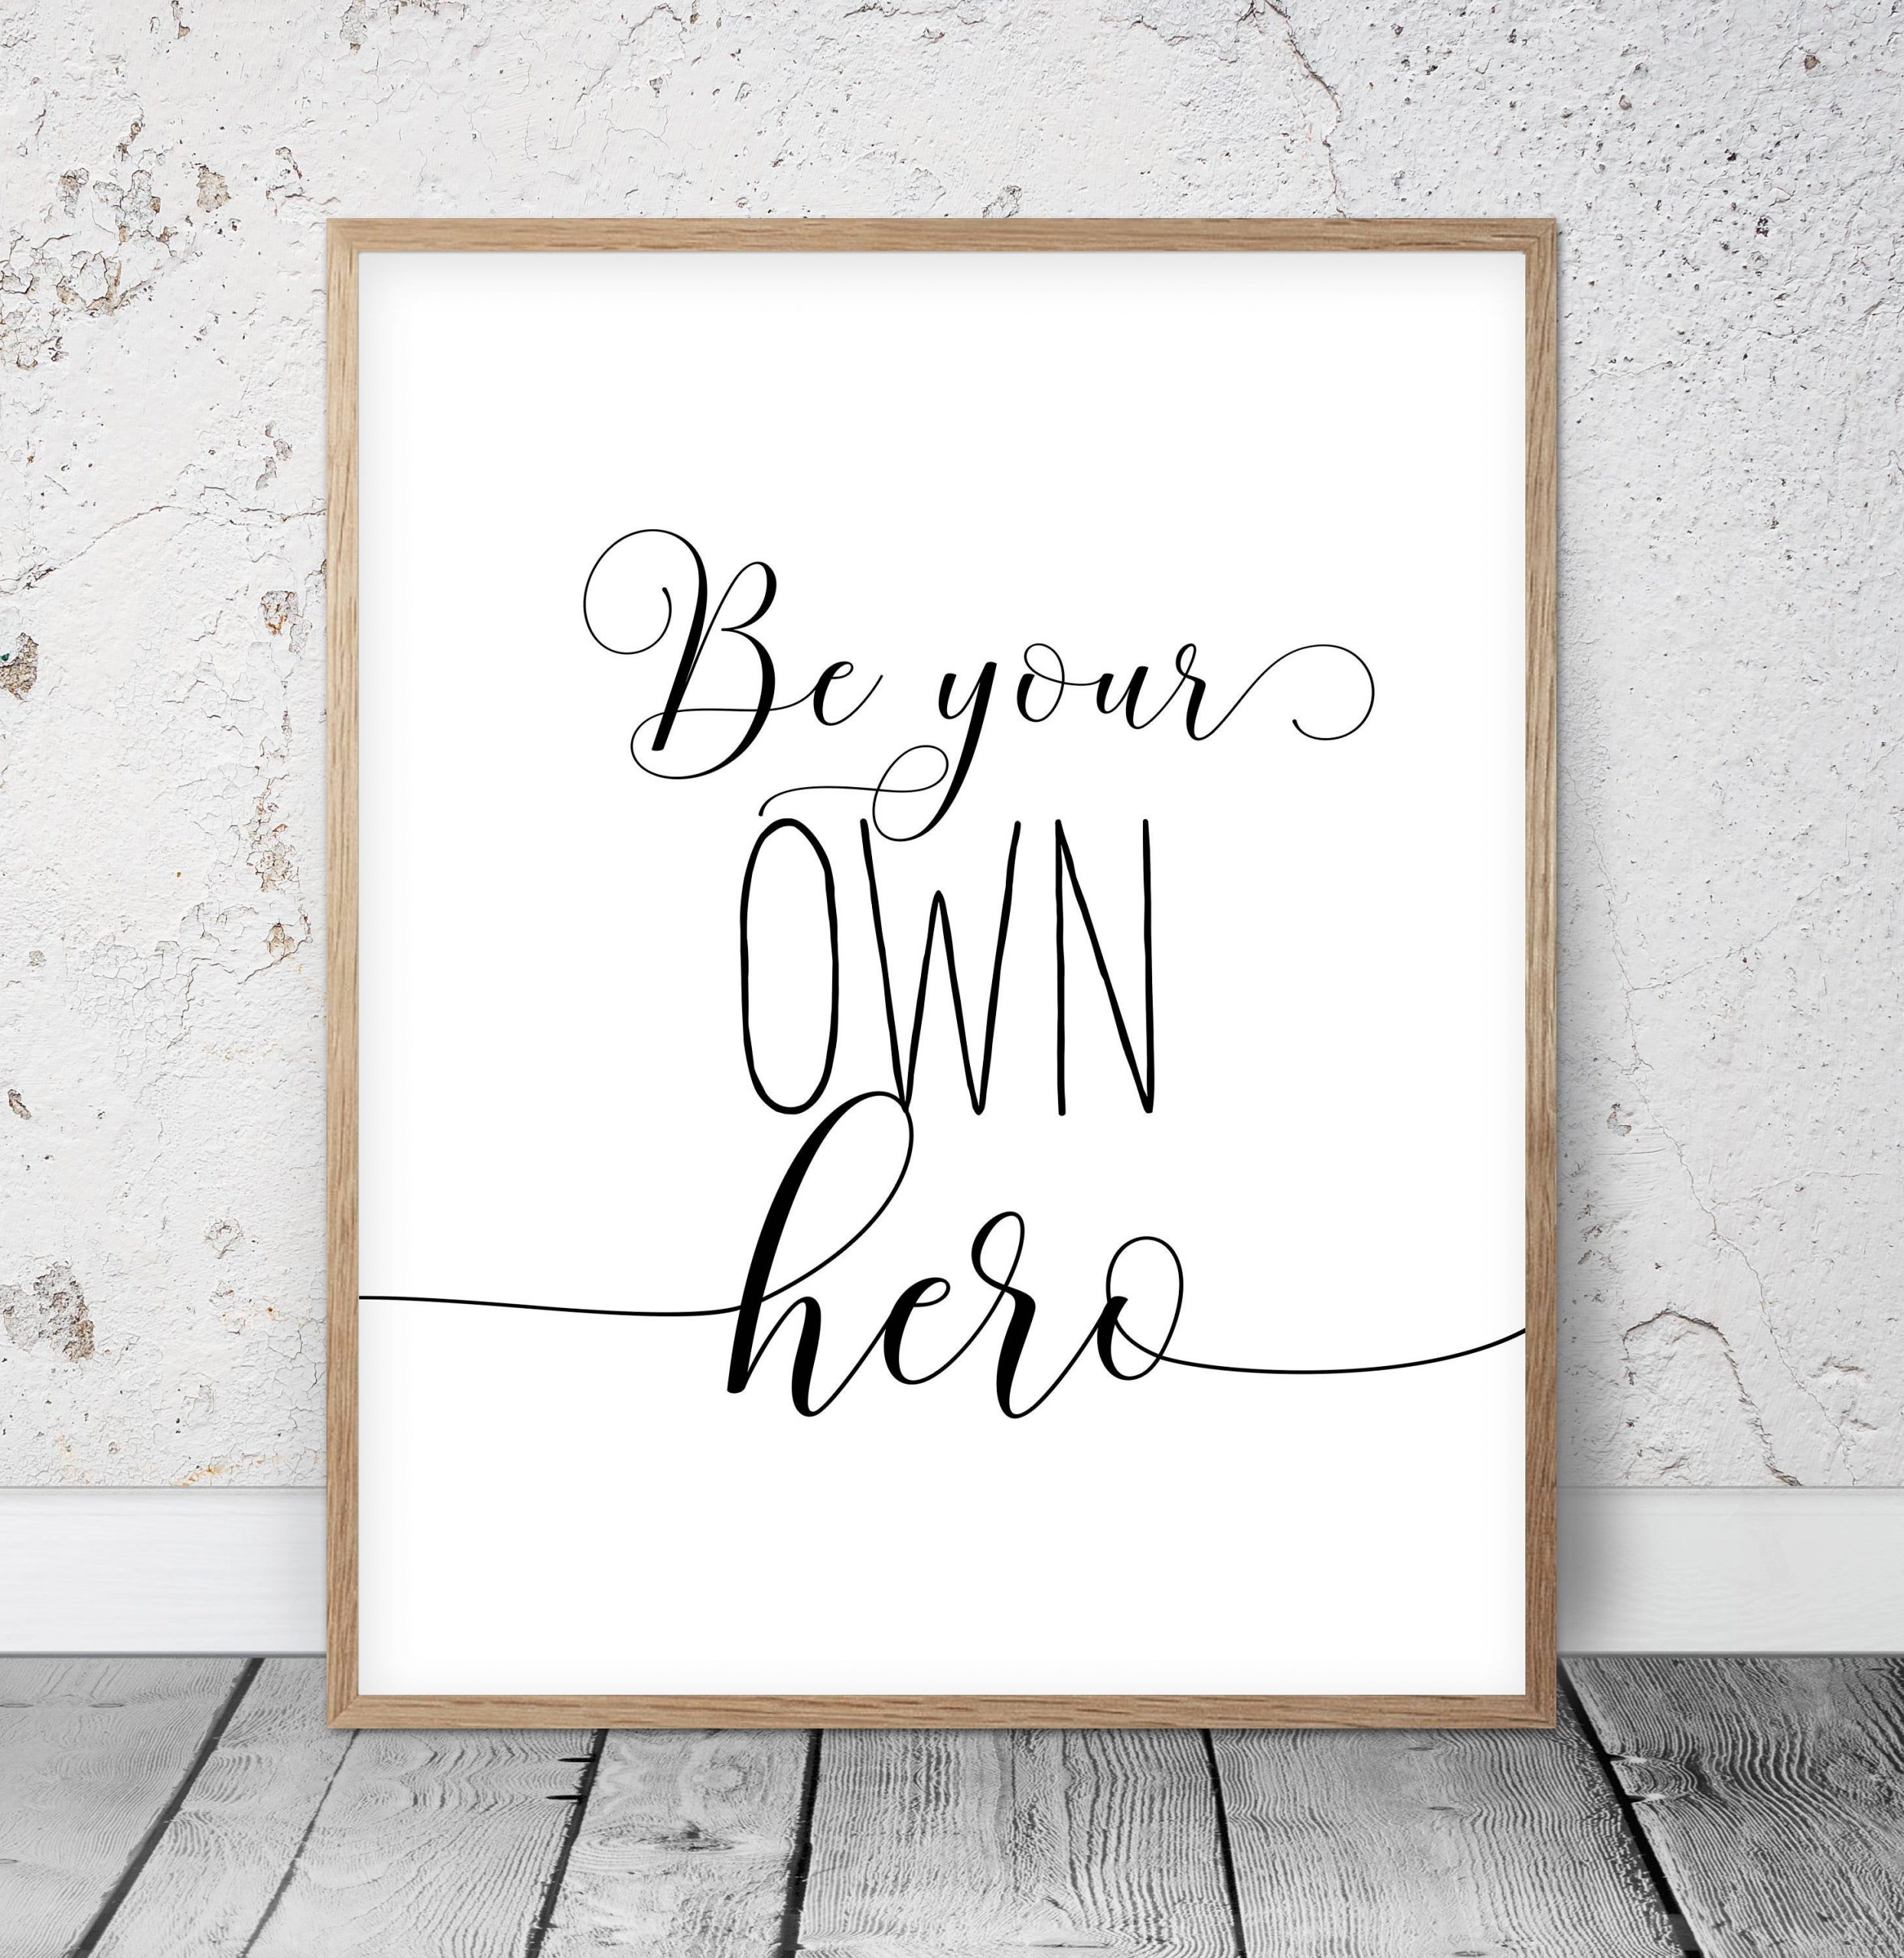 Motivational Wall Art Be Your Own Hero, Motivational Quote, Positive Quote